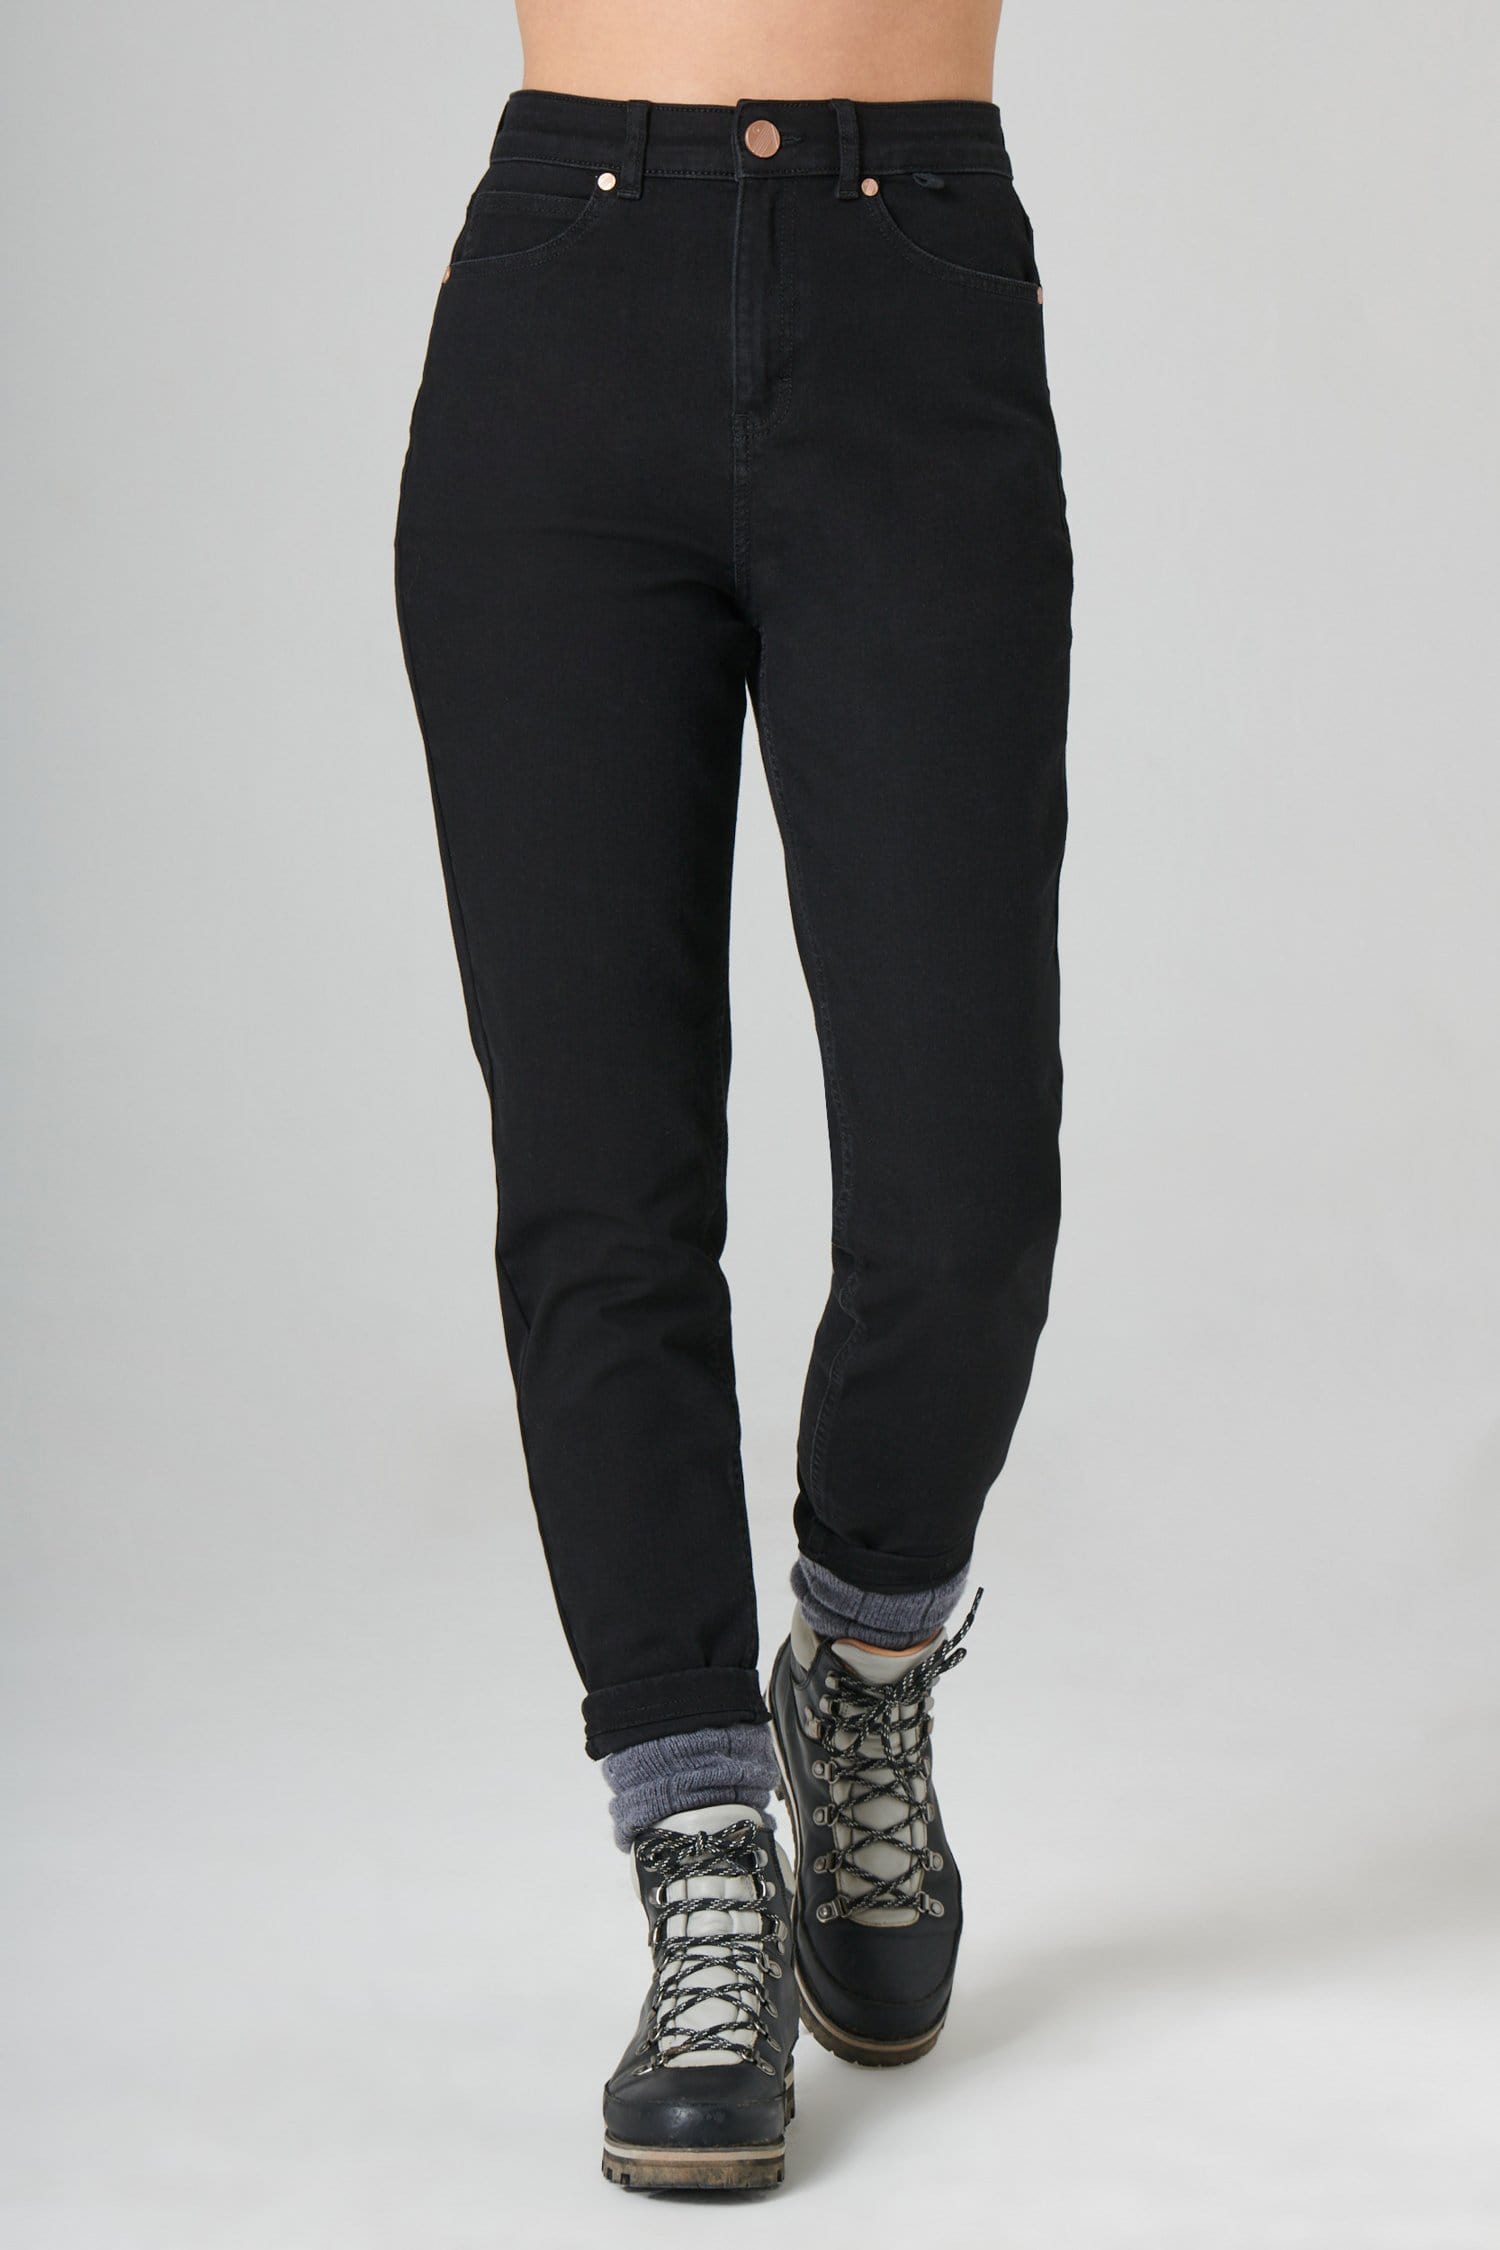 The Outdoor Slim Fit Jeans - Black Denim Trousers  